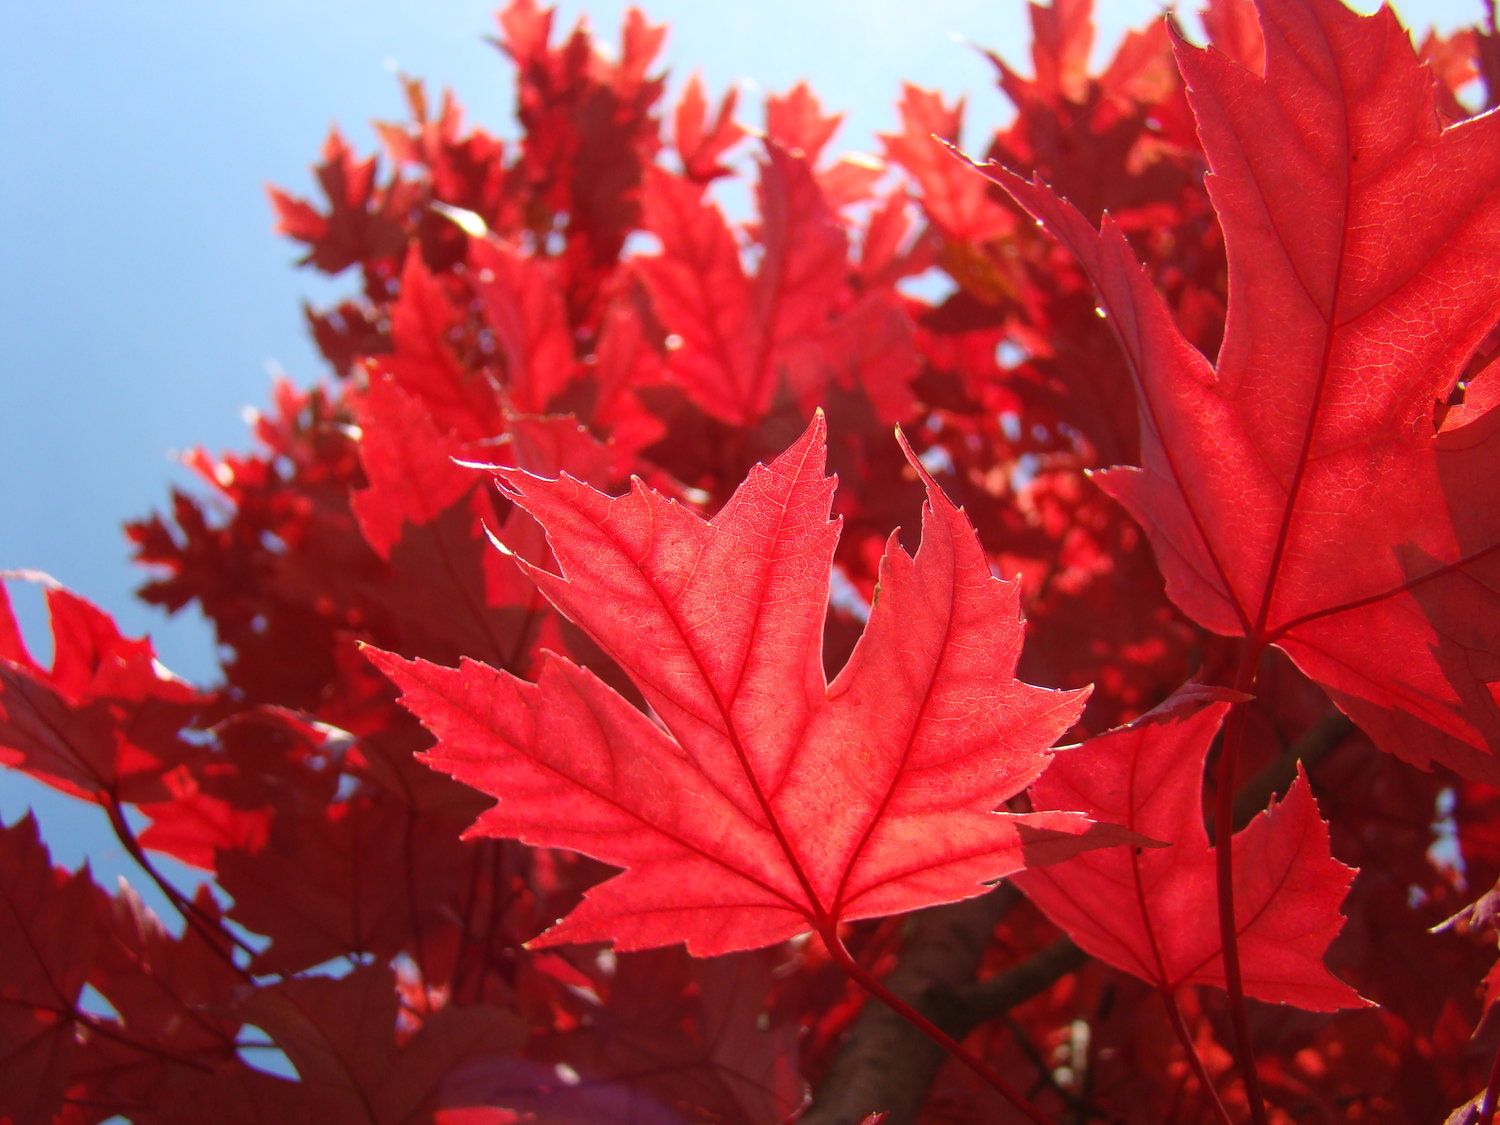 Red and orange colors, produced by pigments called anthocyanins, may protect foliage by blocking excess sunlight.